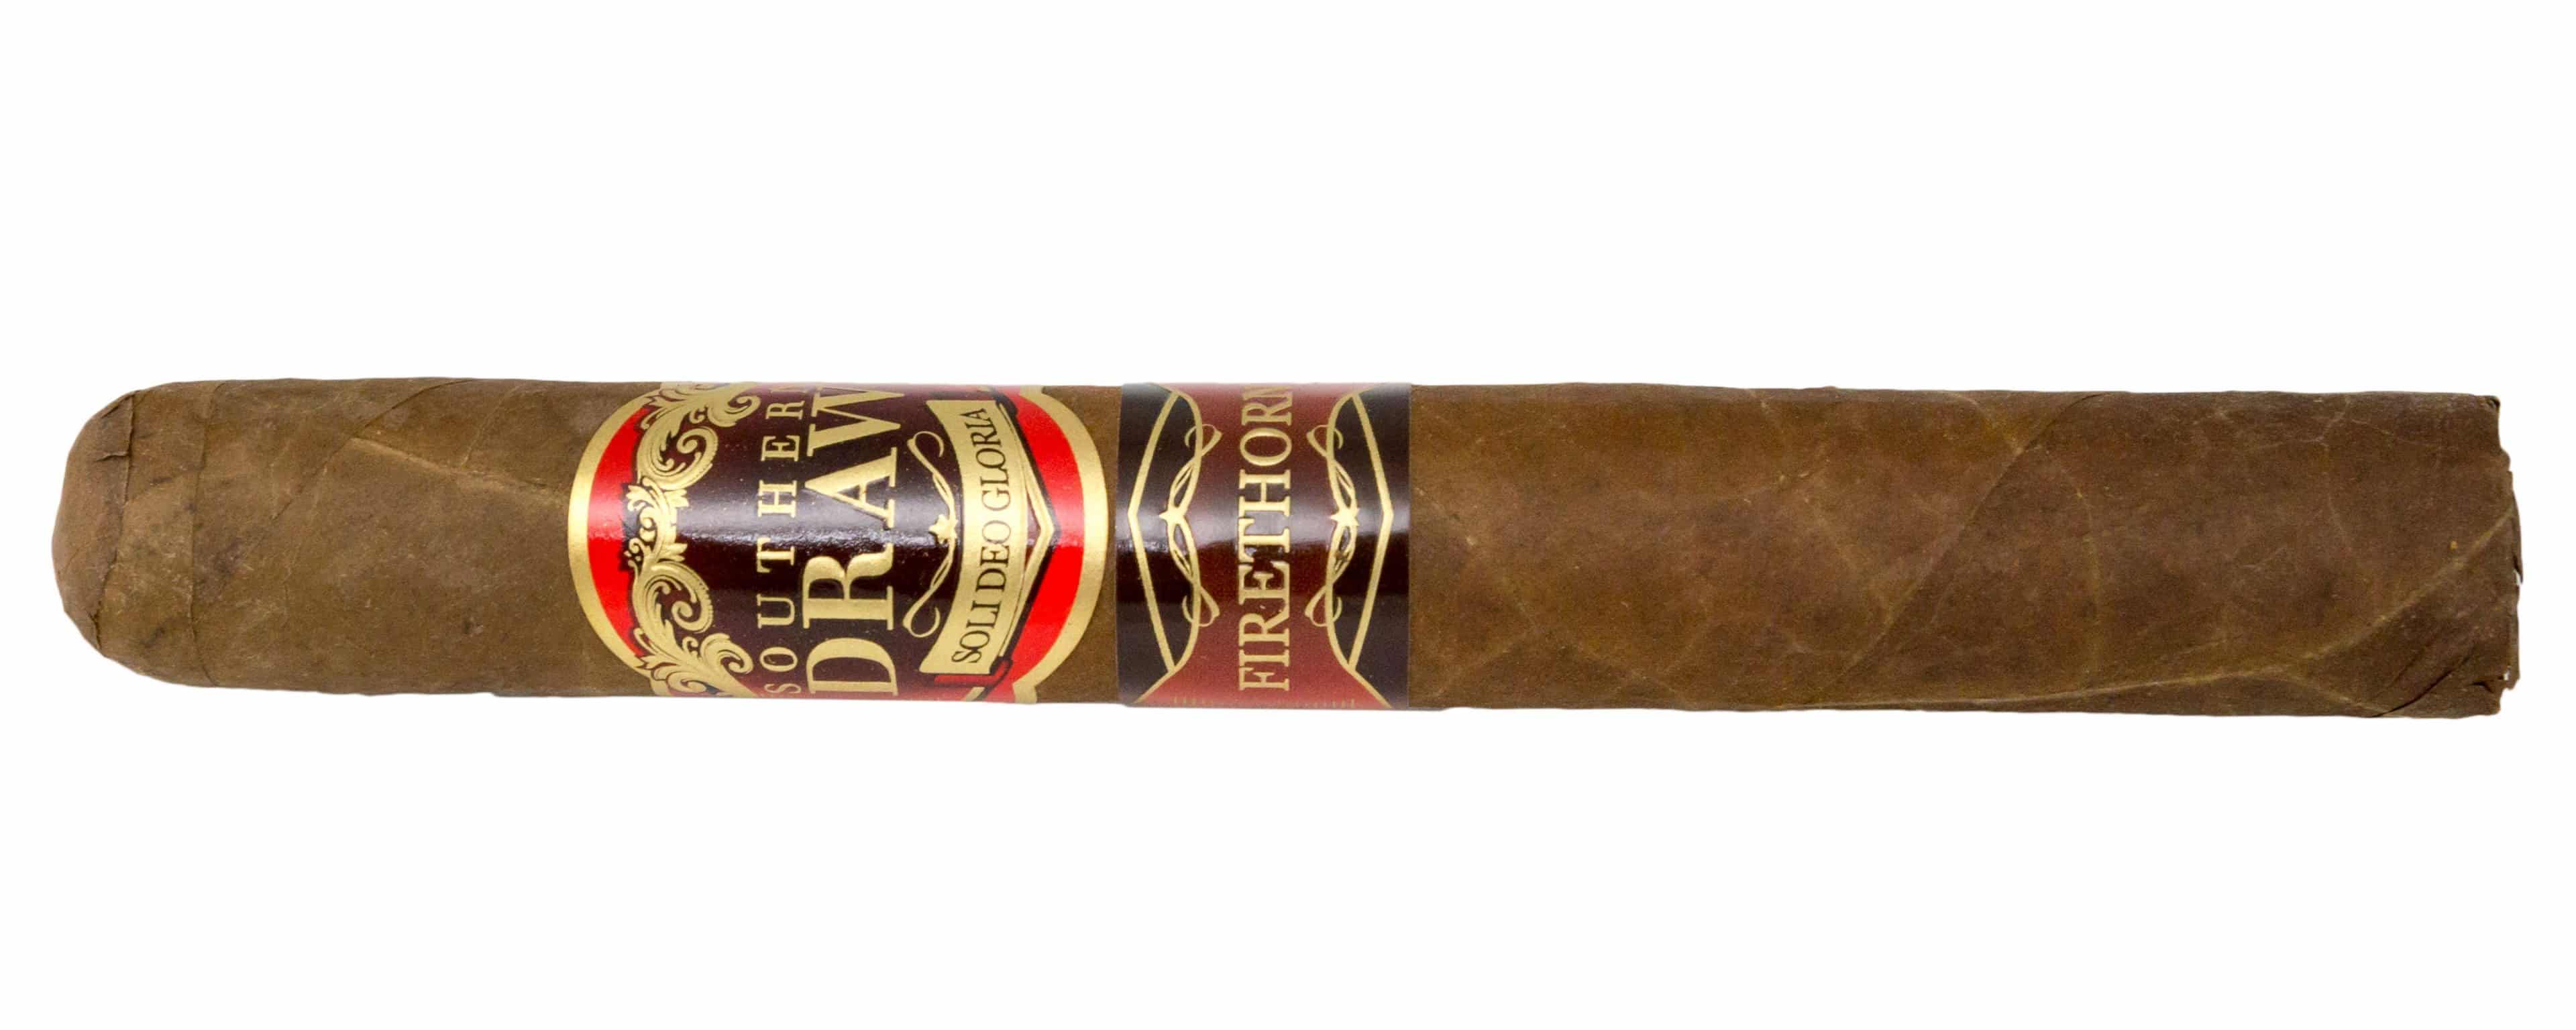 Blind Cigar Review: Southern Draw | Firethorn